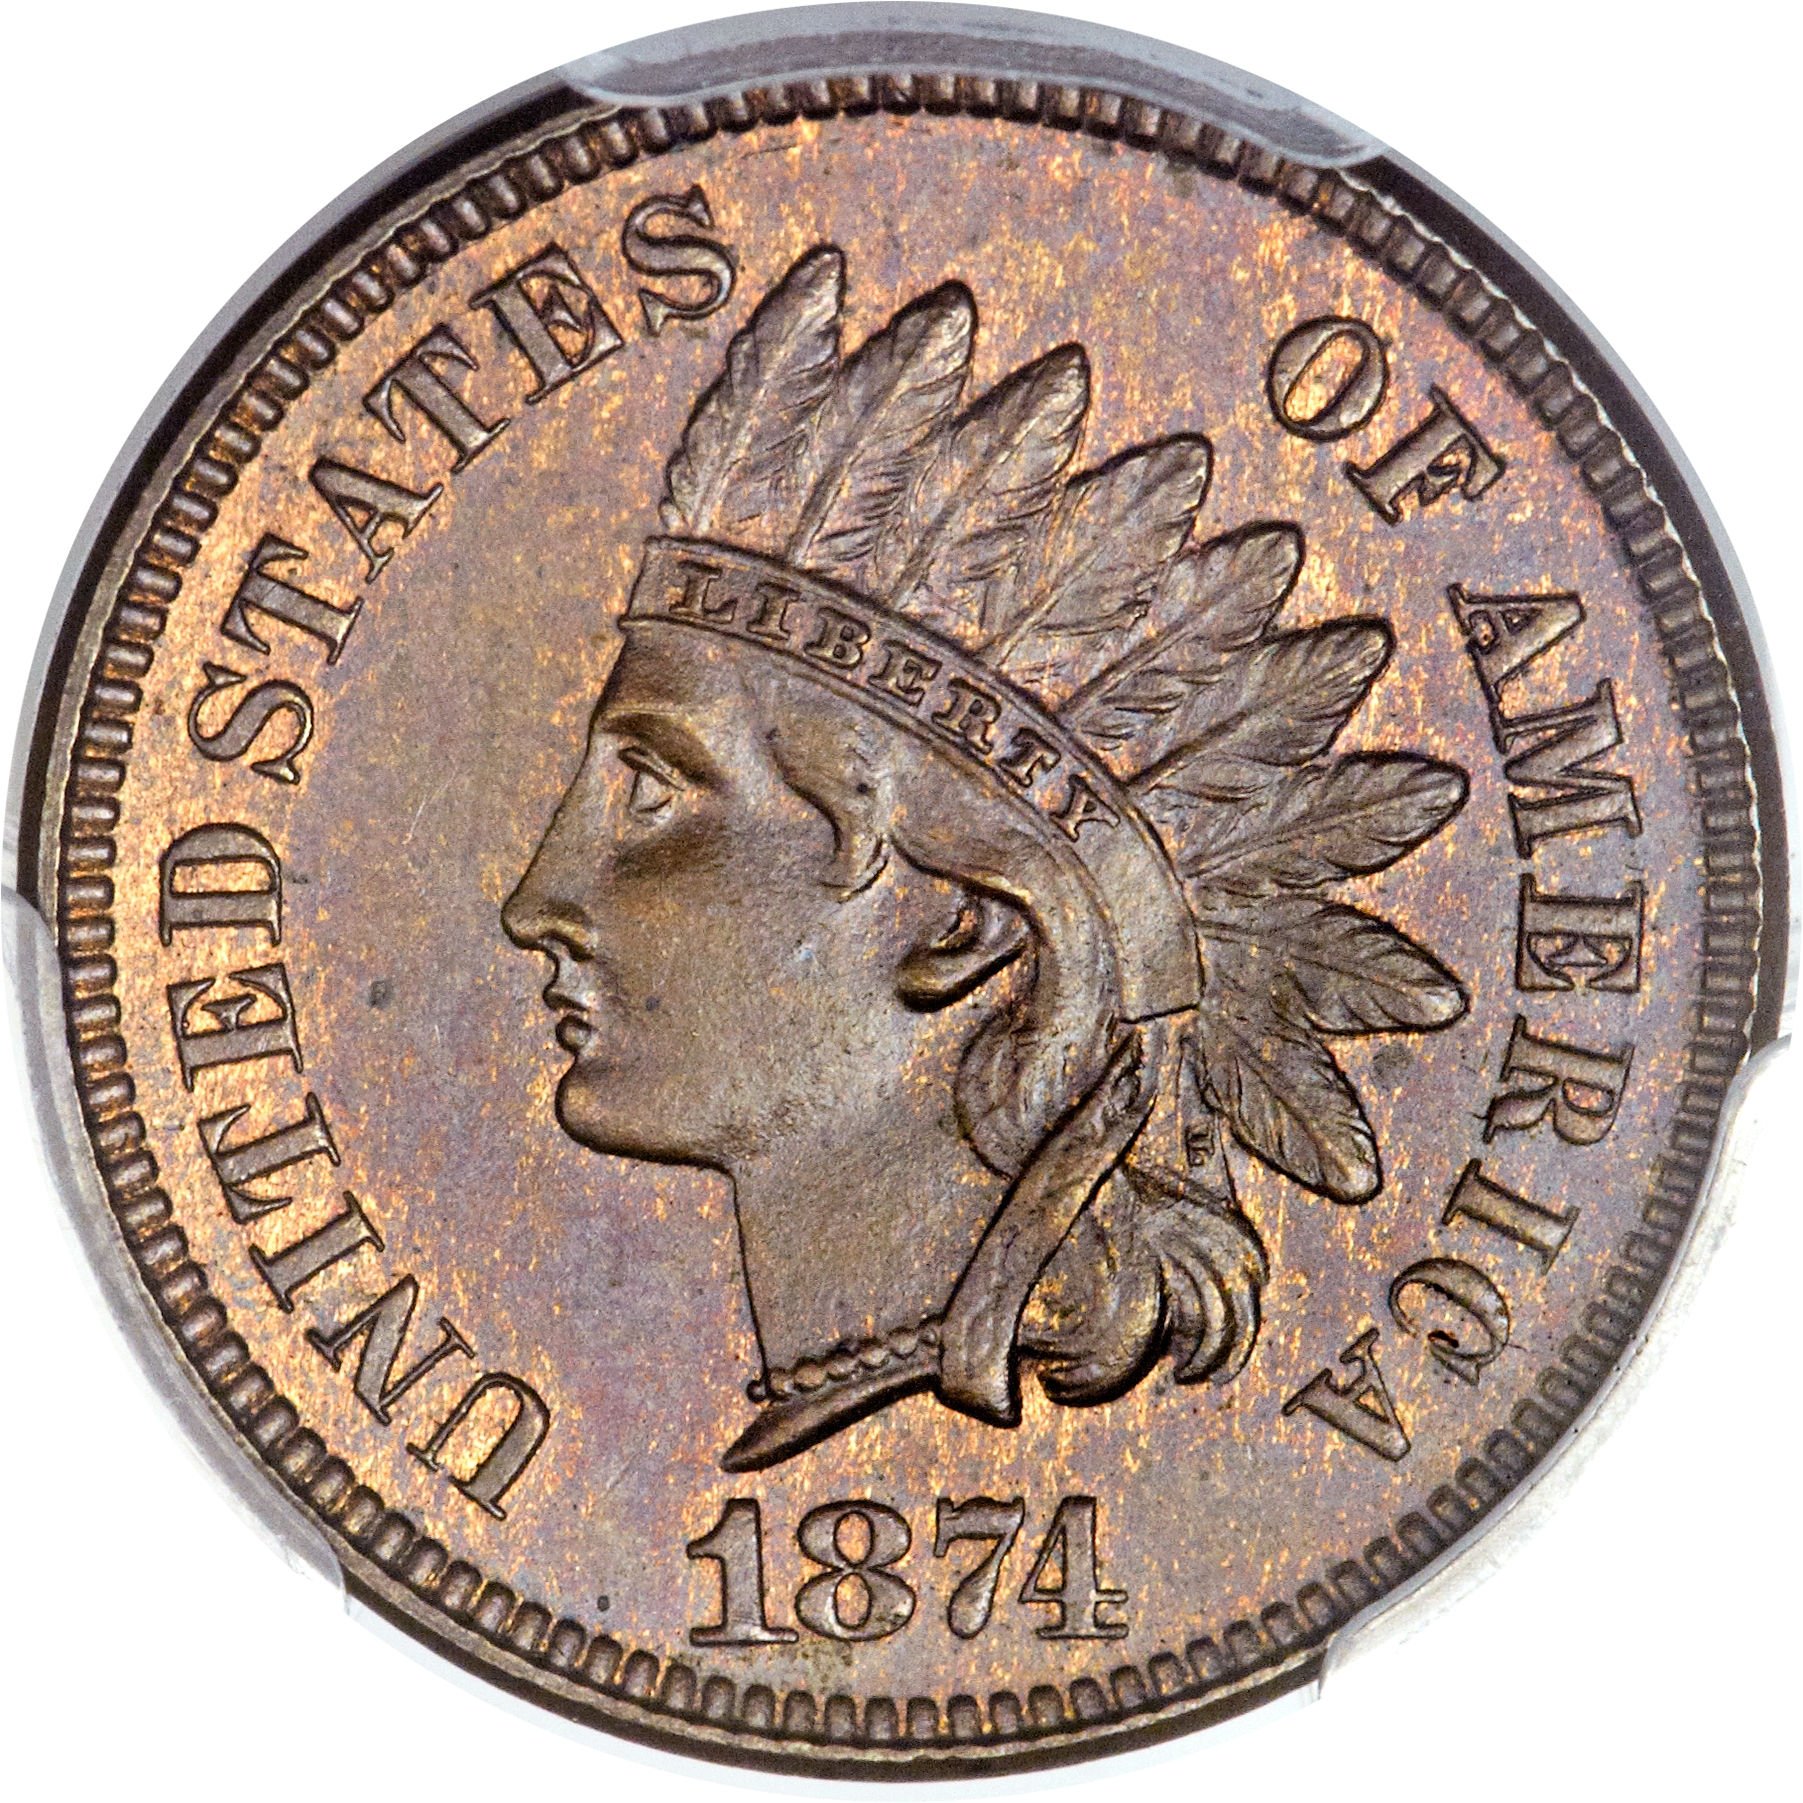 1874 DDO-001 Indian Head Penny - Photo courtesy of Heritage Auctions